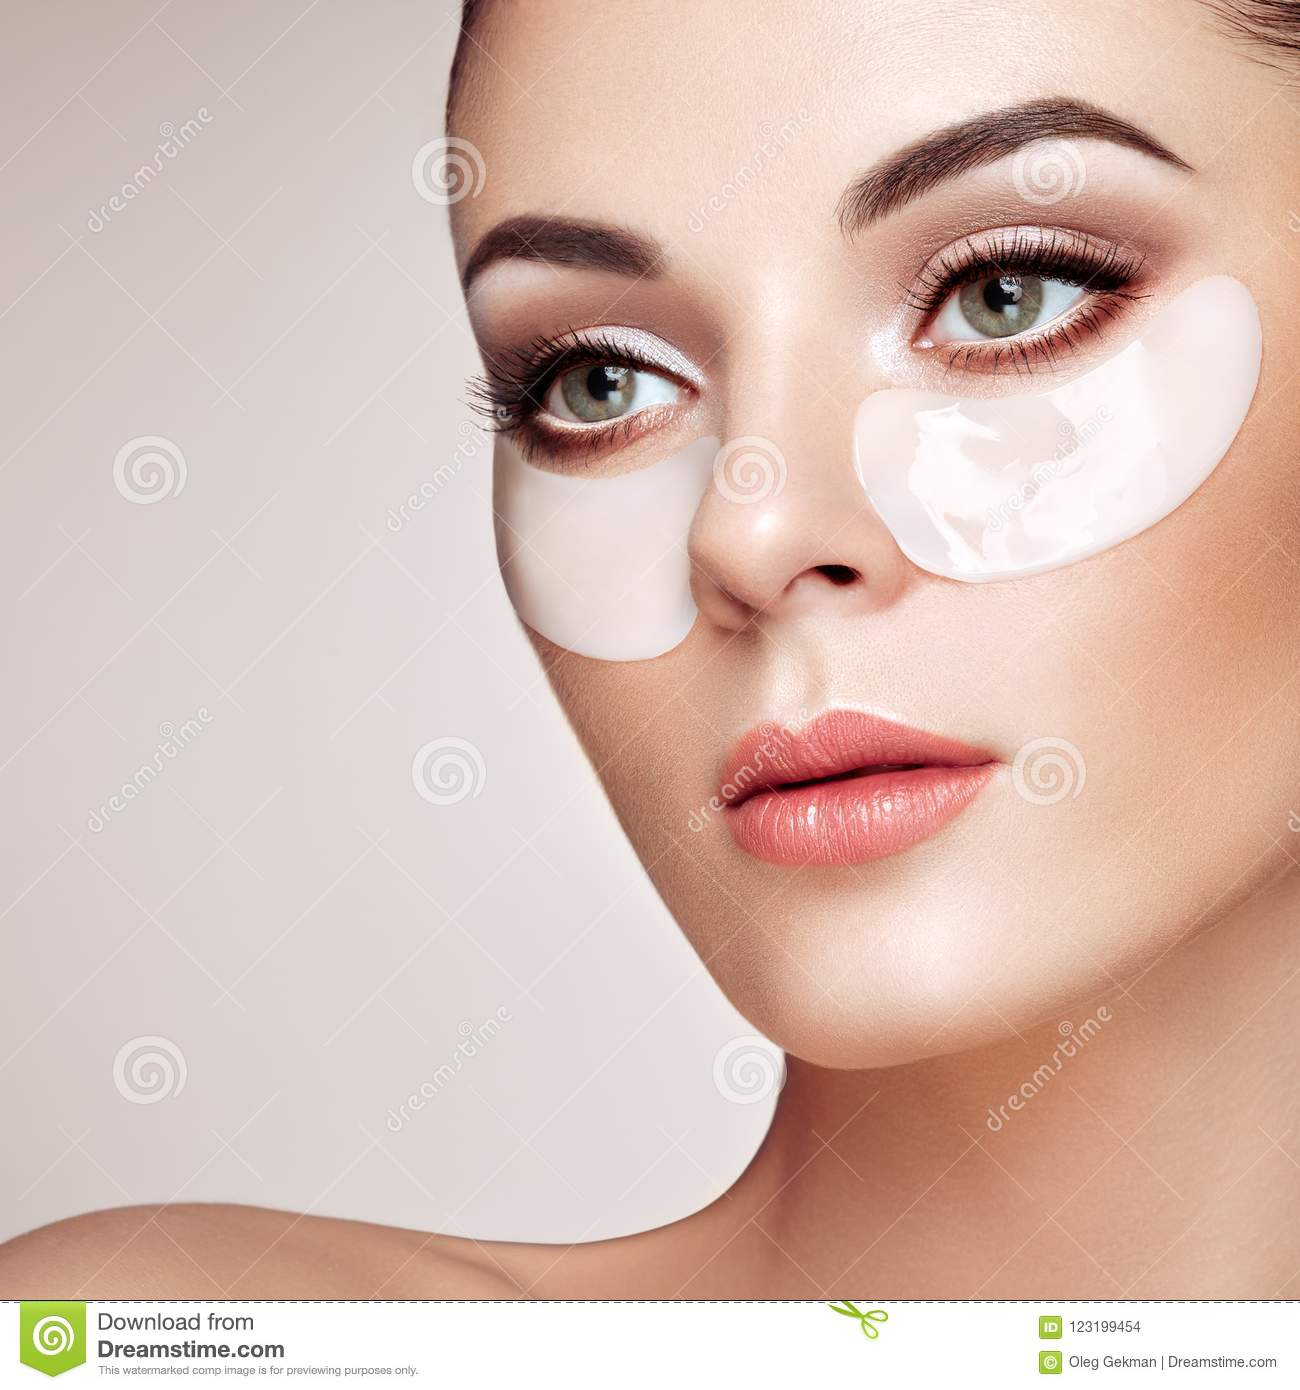 White Makeup Under Eyes Portrait Of Beauty Woman With Eye Patches Stock Photo Image Of